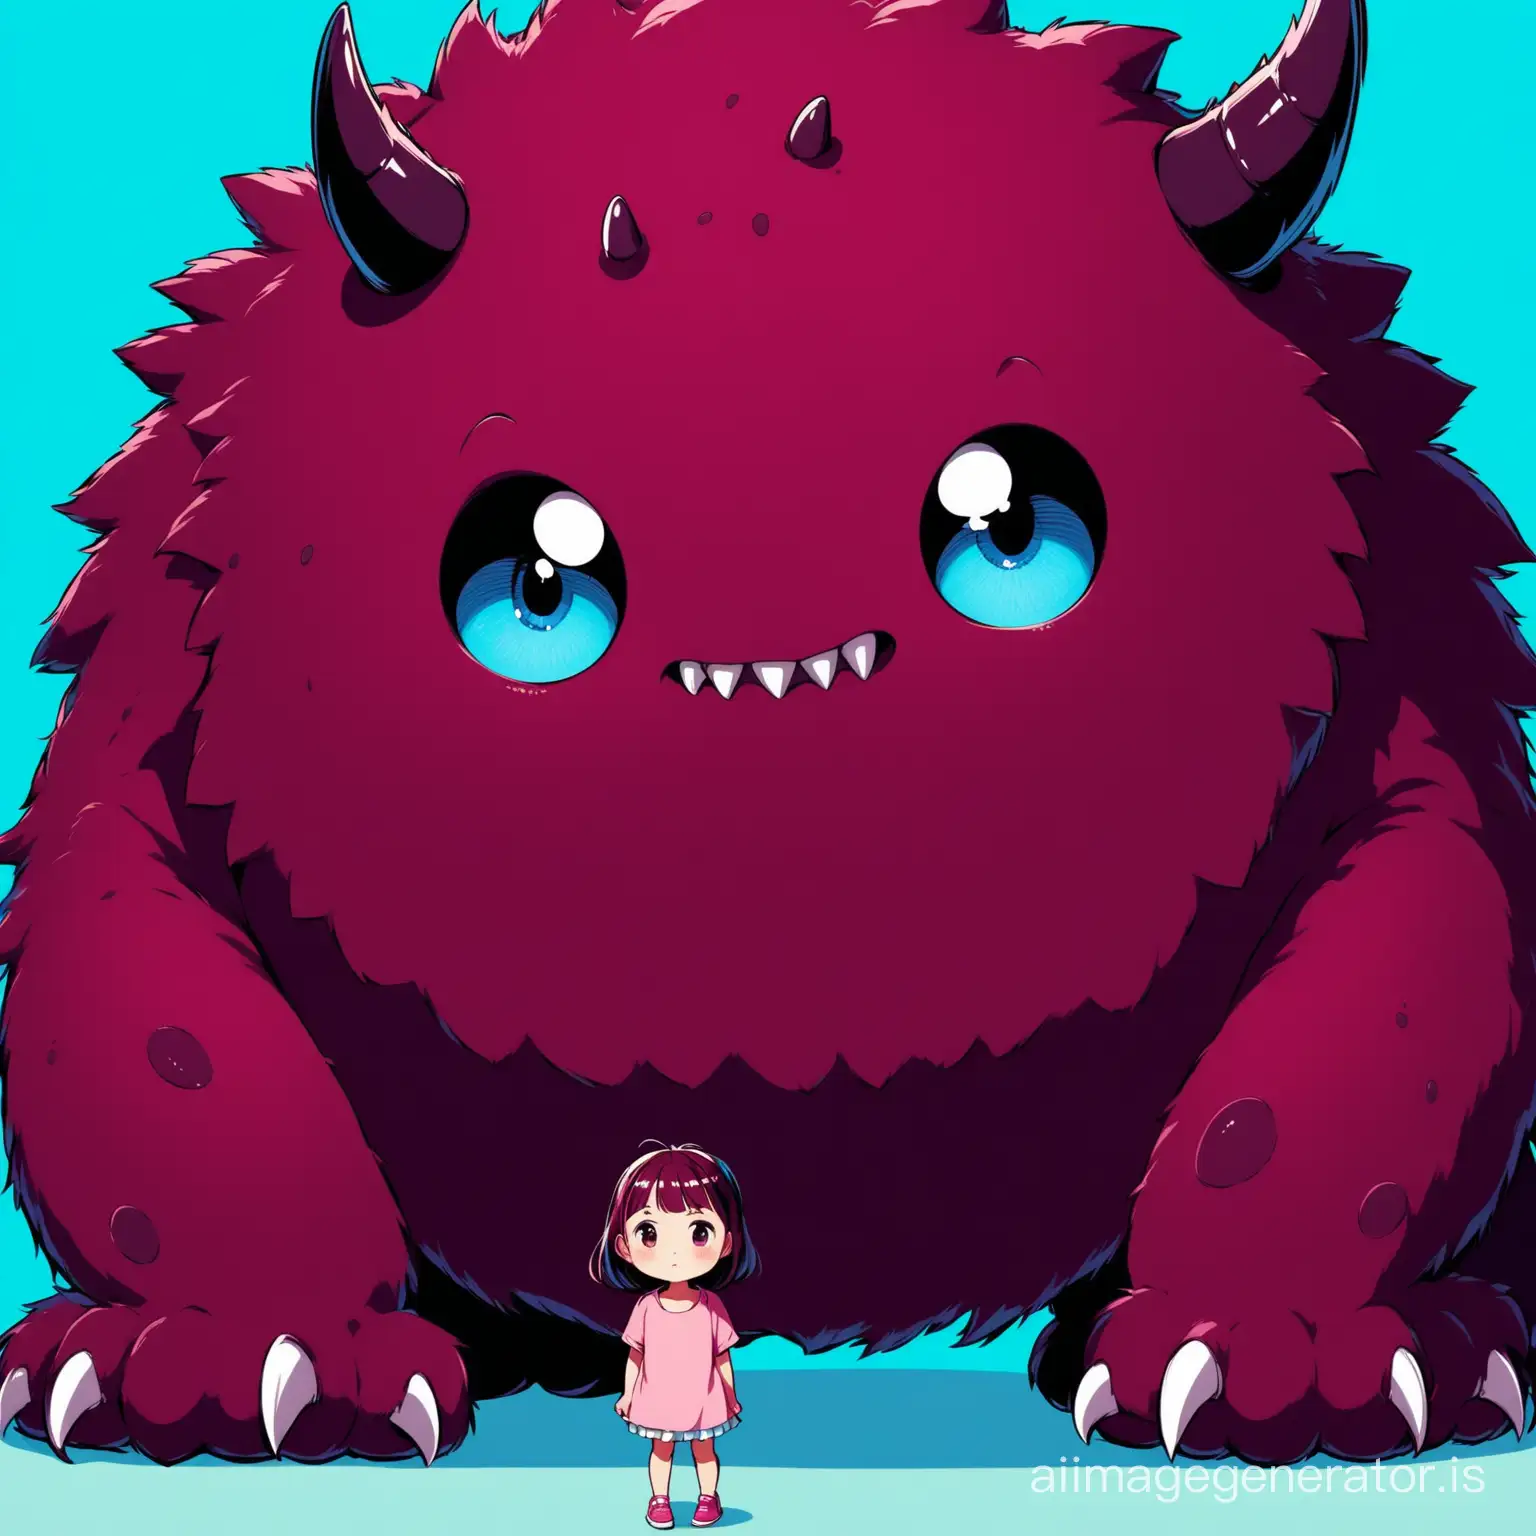 little girl next to a burgundy-colored monster with a blue background